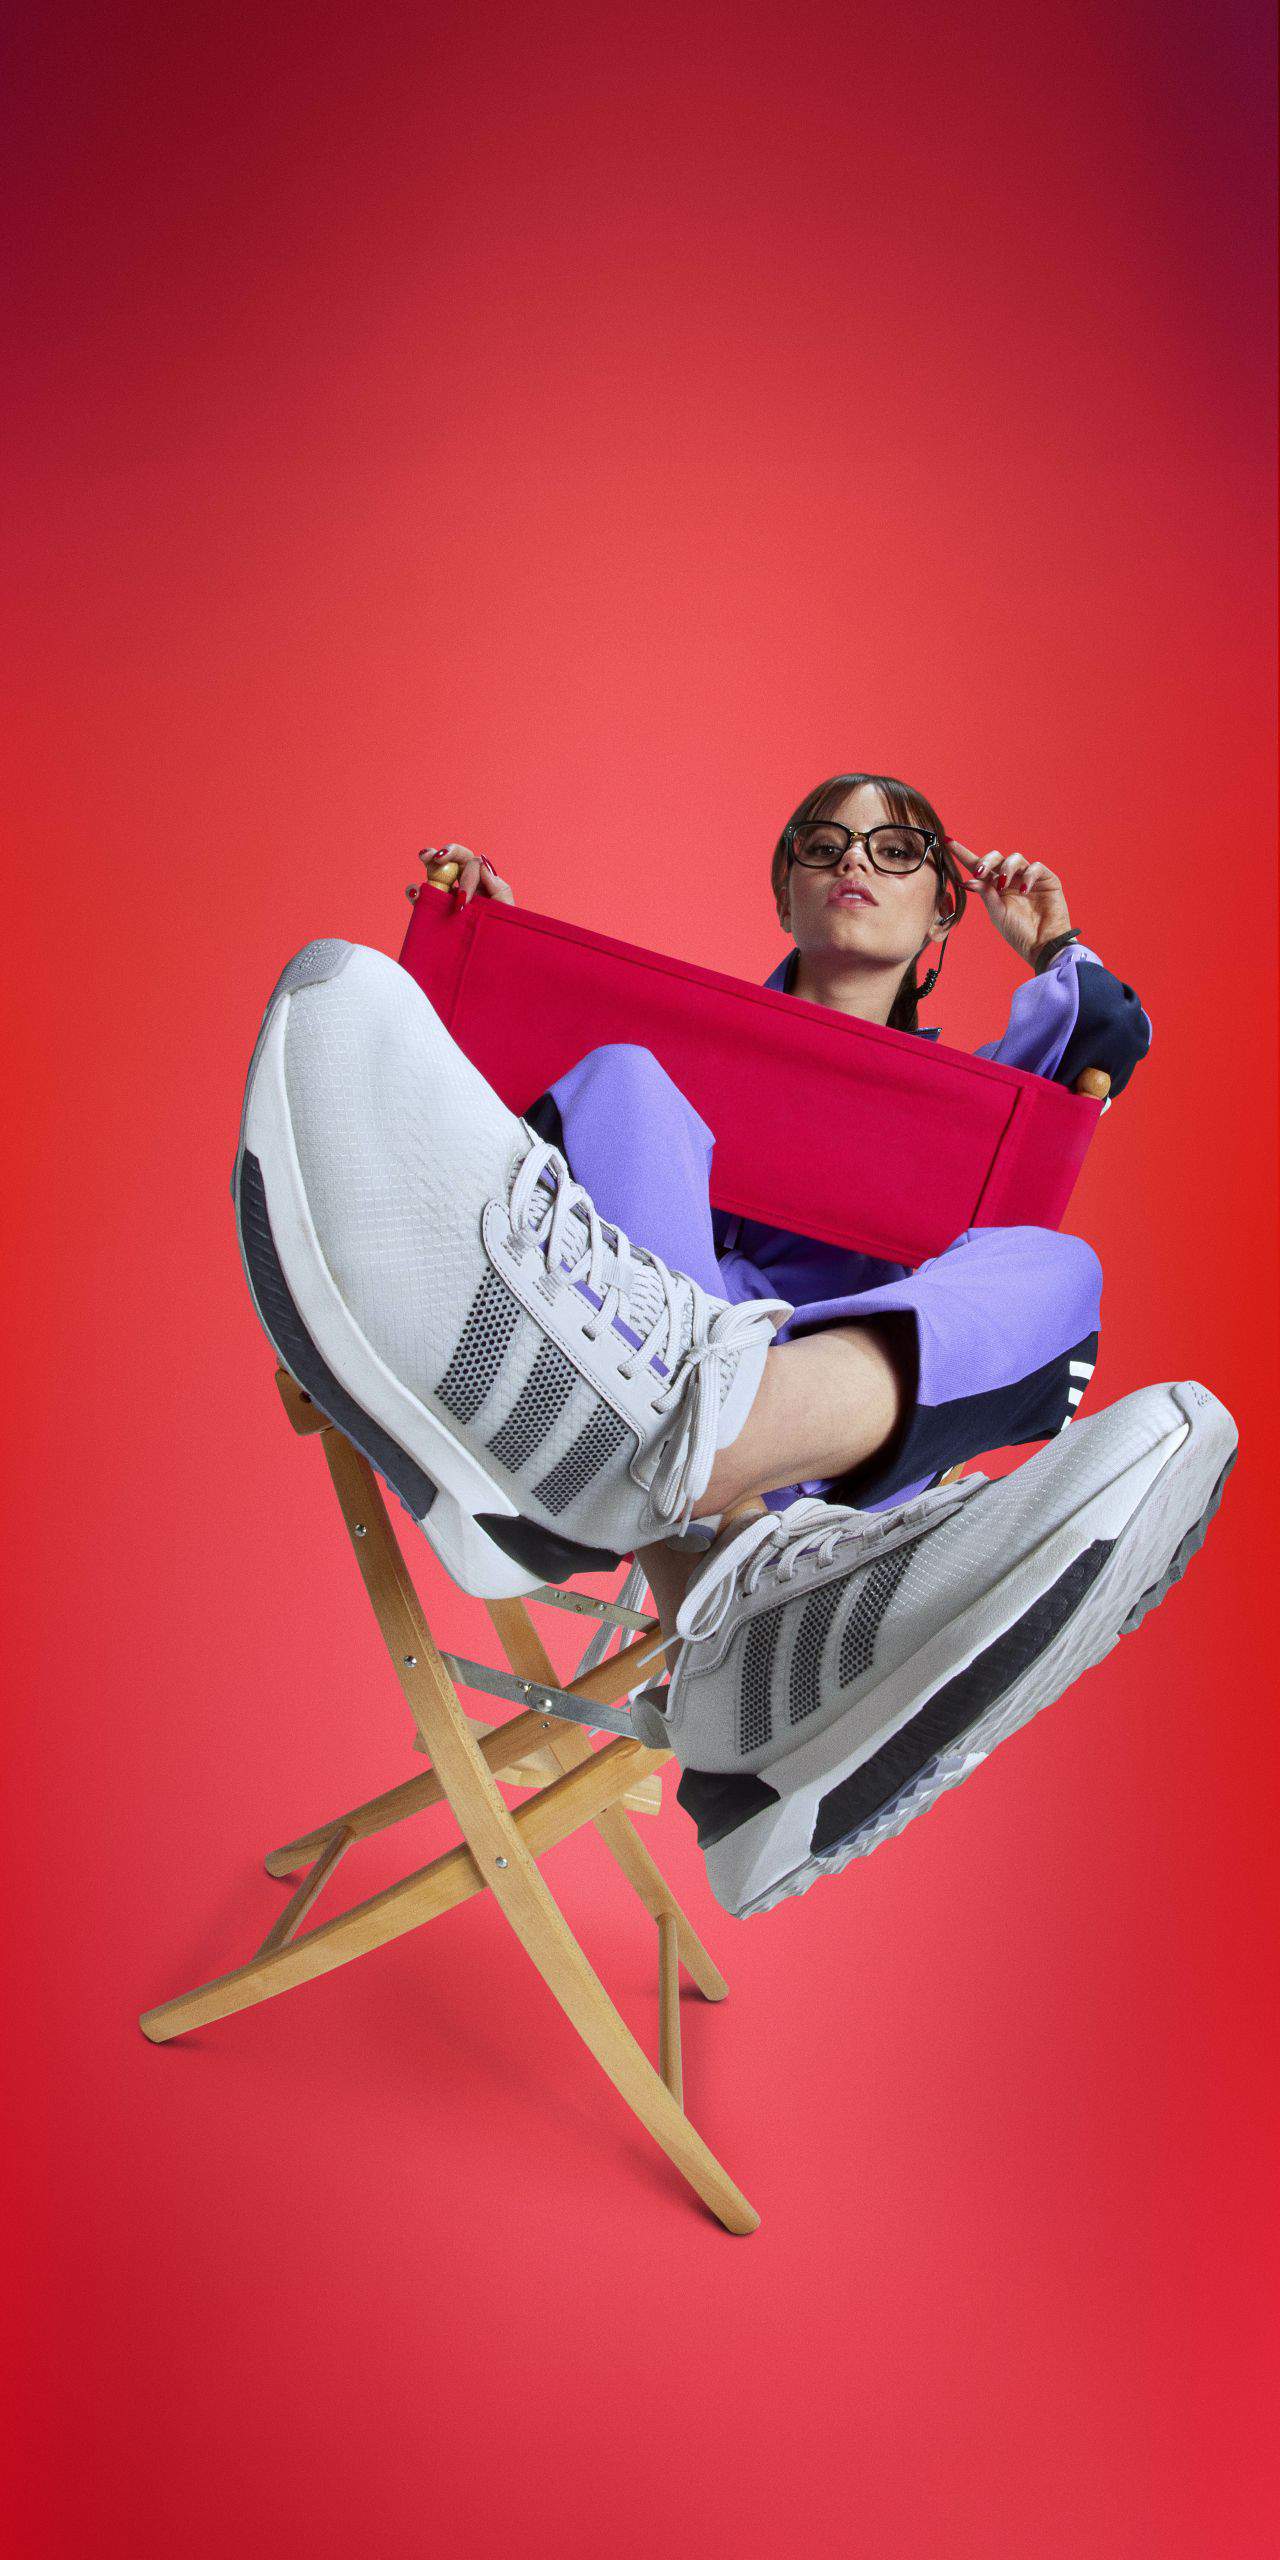 Jenna Ortega is the Face of Adidas' New Campaign "All That You Are"